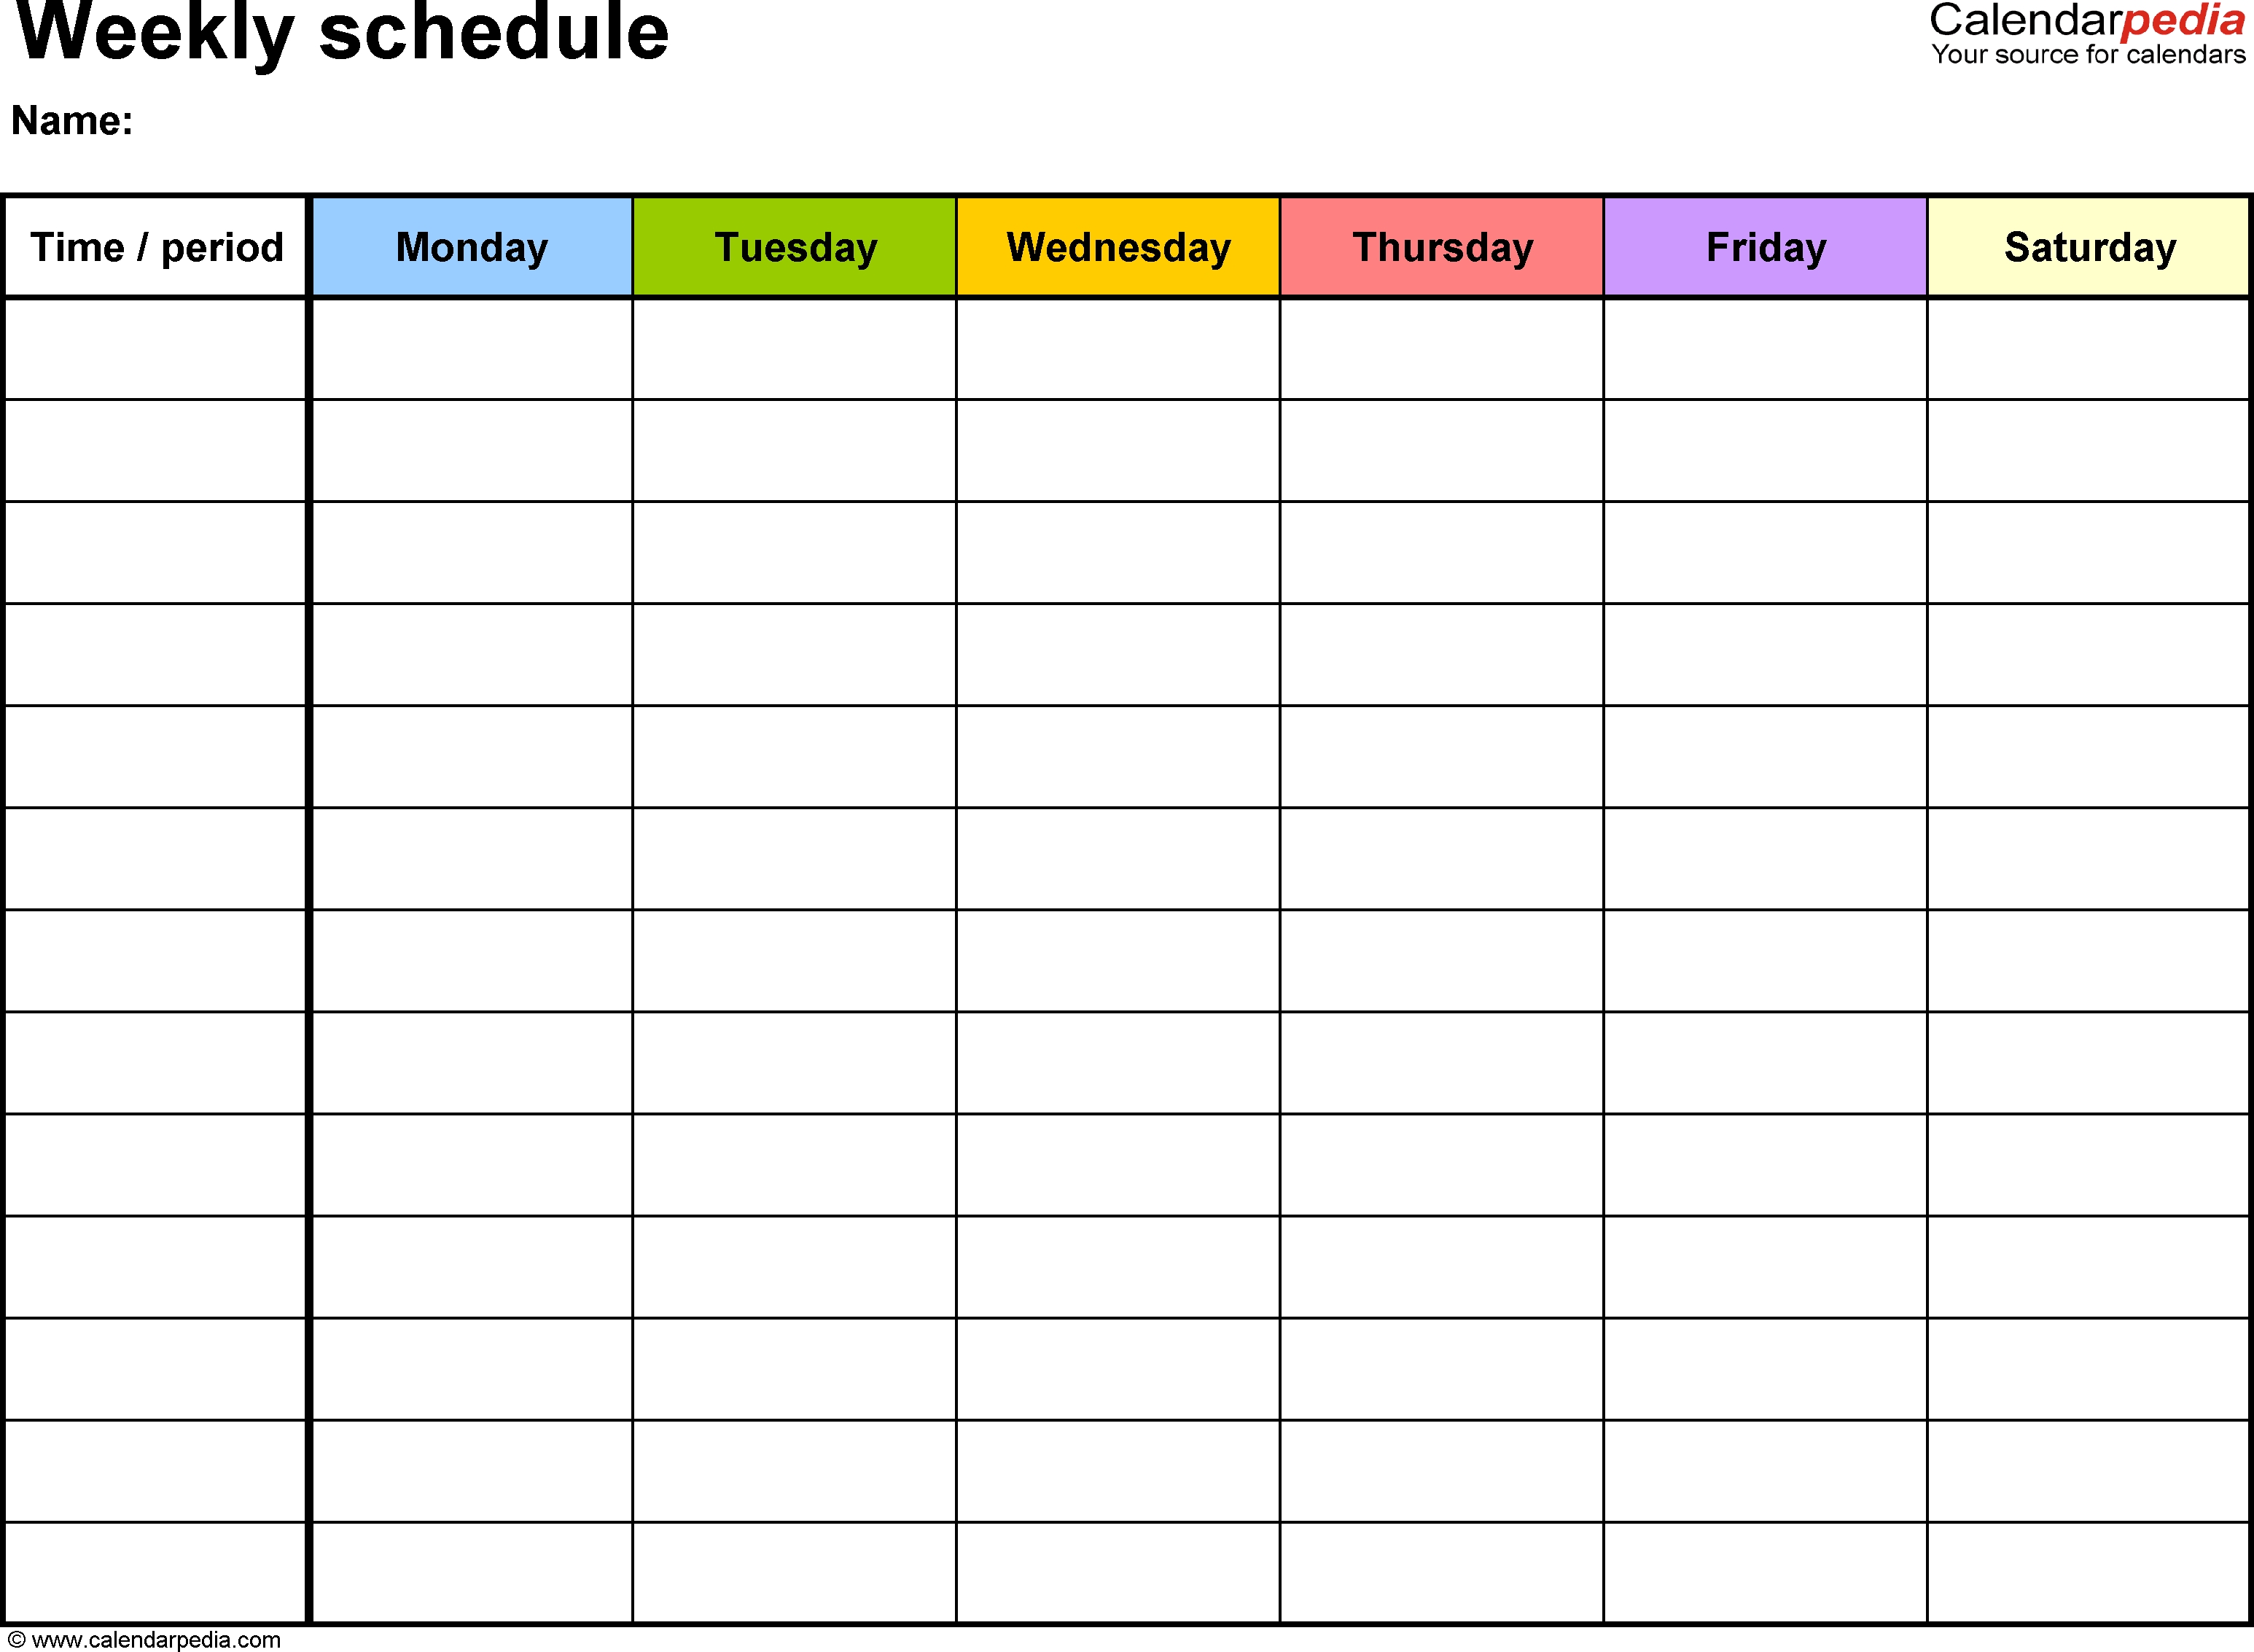 Free Weekly Schedule Templates For Word - 18 Templates Blank Calendar Monday To Friday